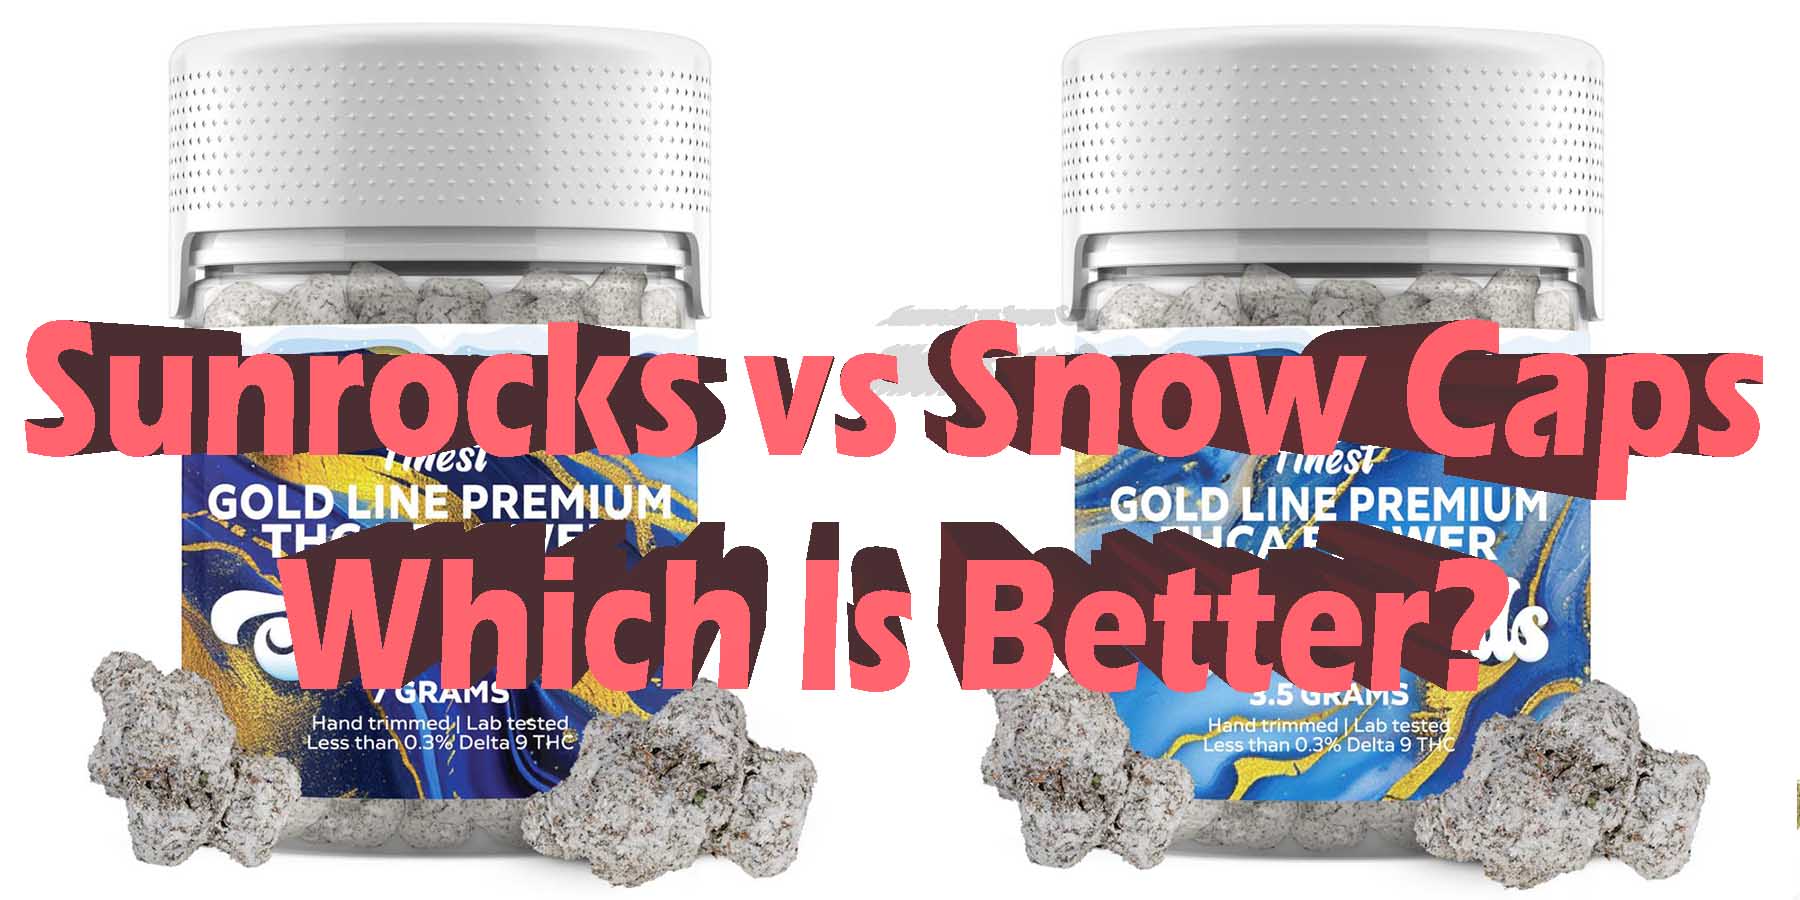 Sunrocks vs Snow Caps Which Is Better Discount For Smoking Best High Smoke THCA THC Cannabinoids Shop Online Where To Buy How To Buy Strongest Bloomz